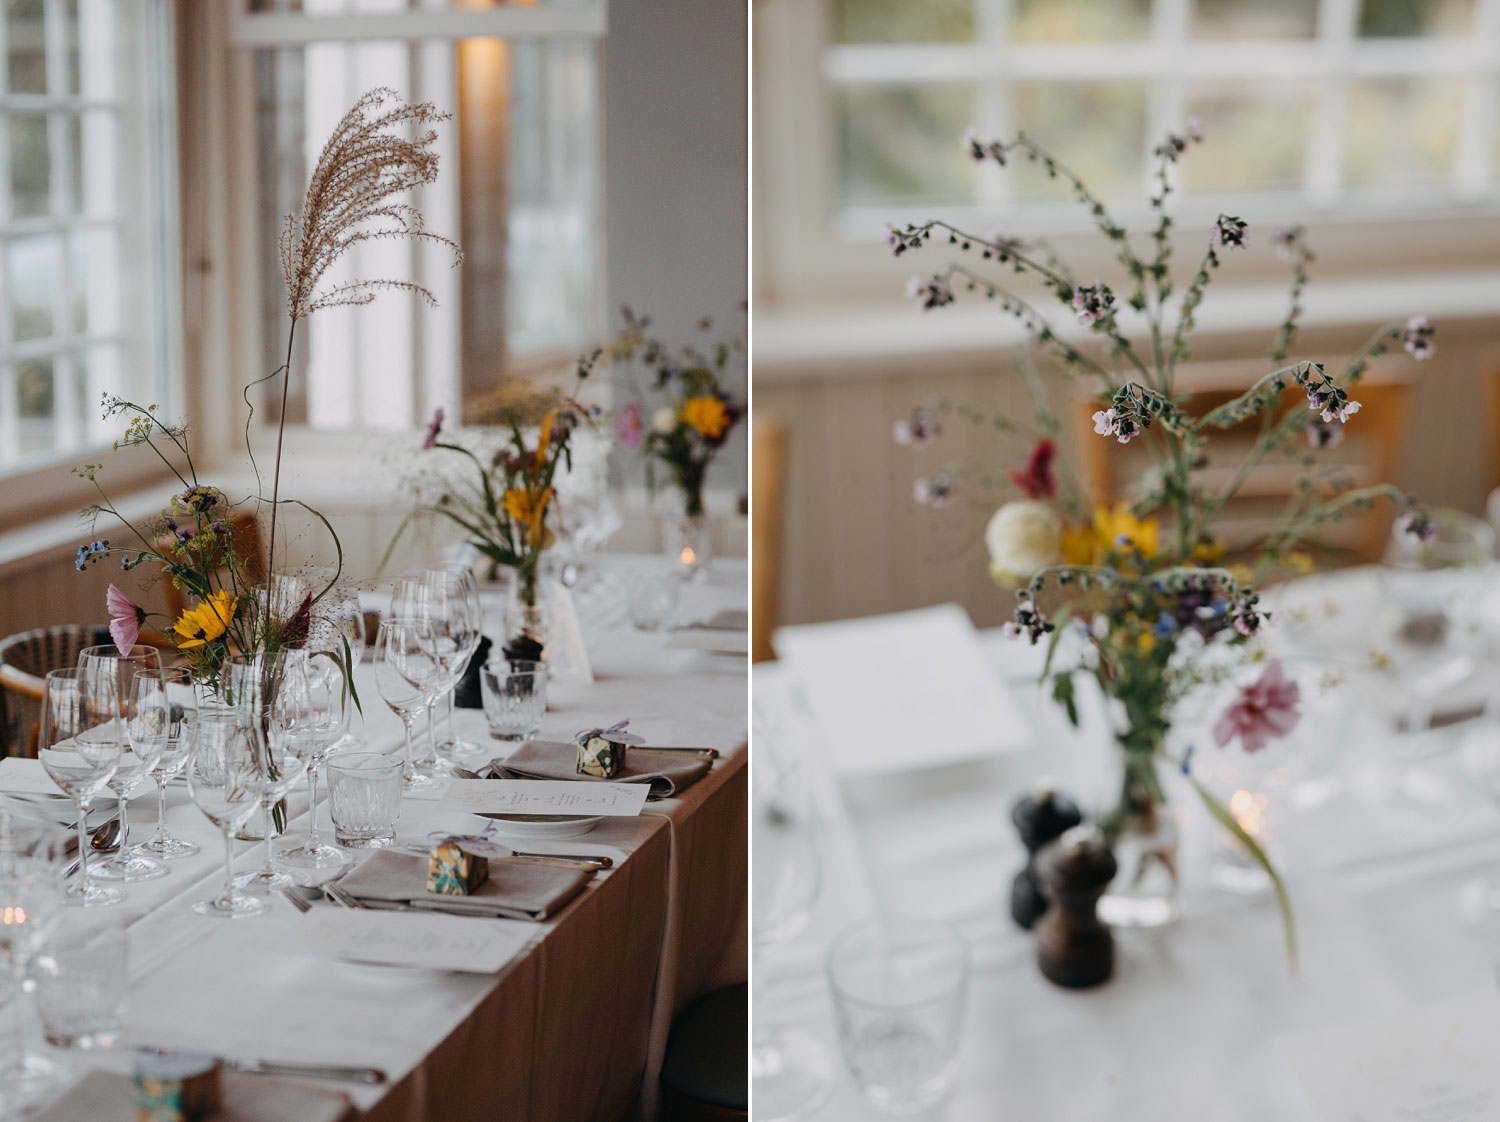 timeless and elegant table settings at the reception at Helenekilde Badehotel